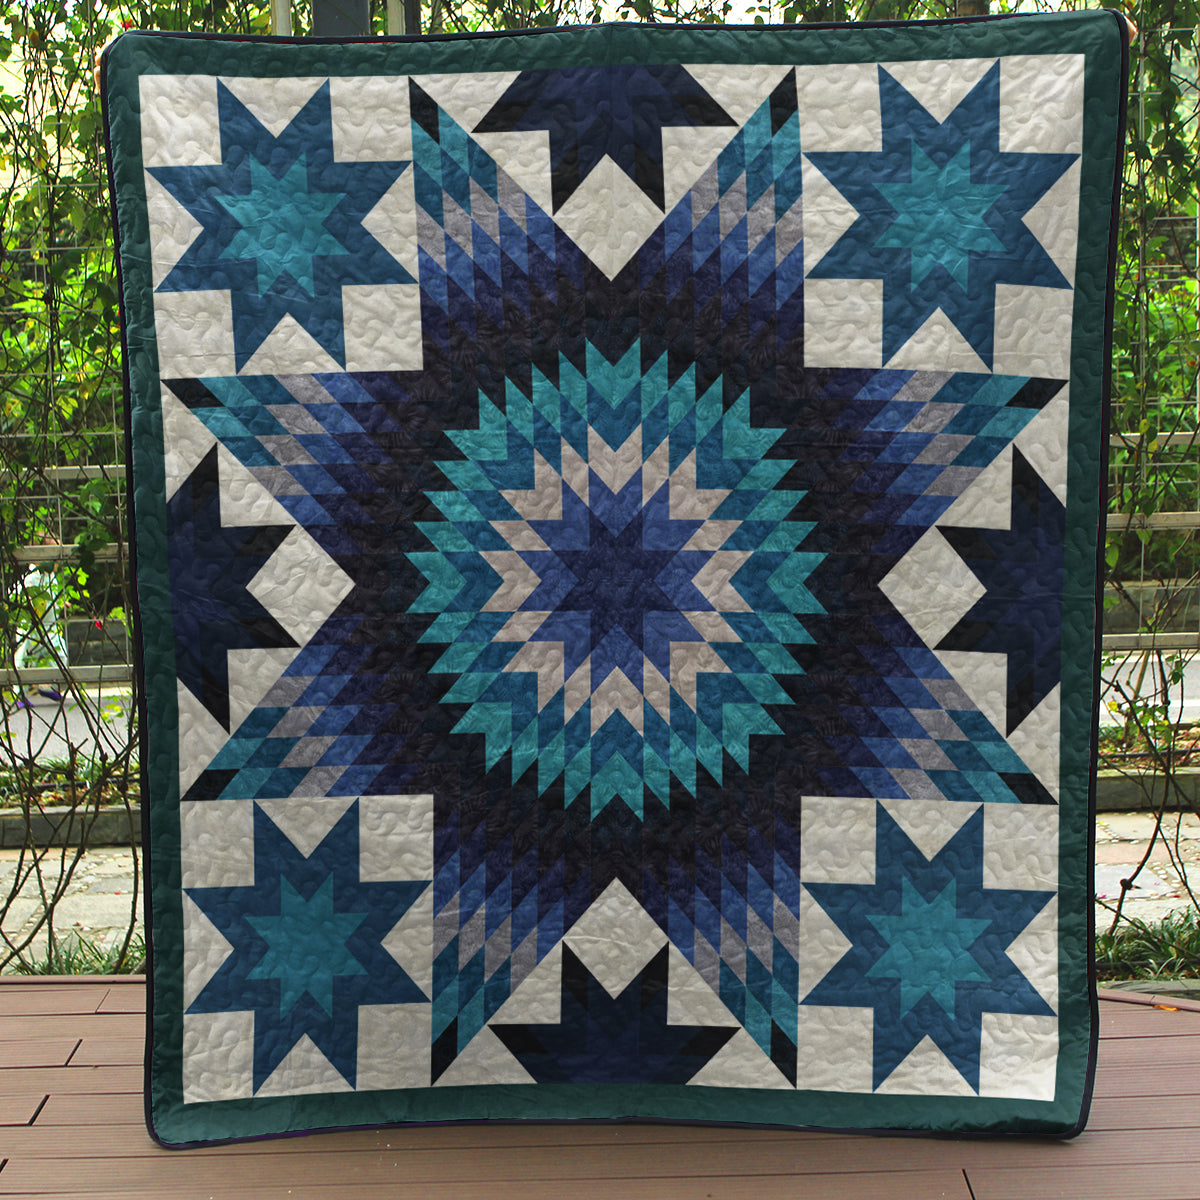 Native American Inspired Star Art Quilt MT200501M